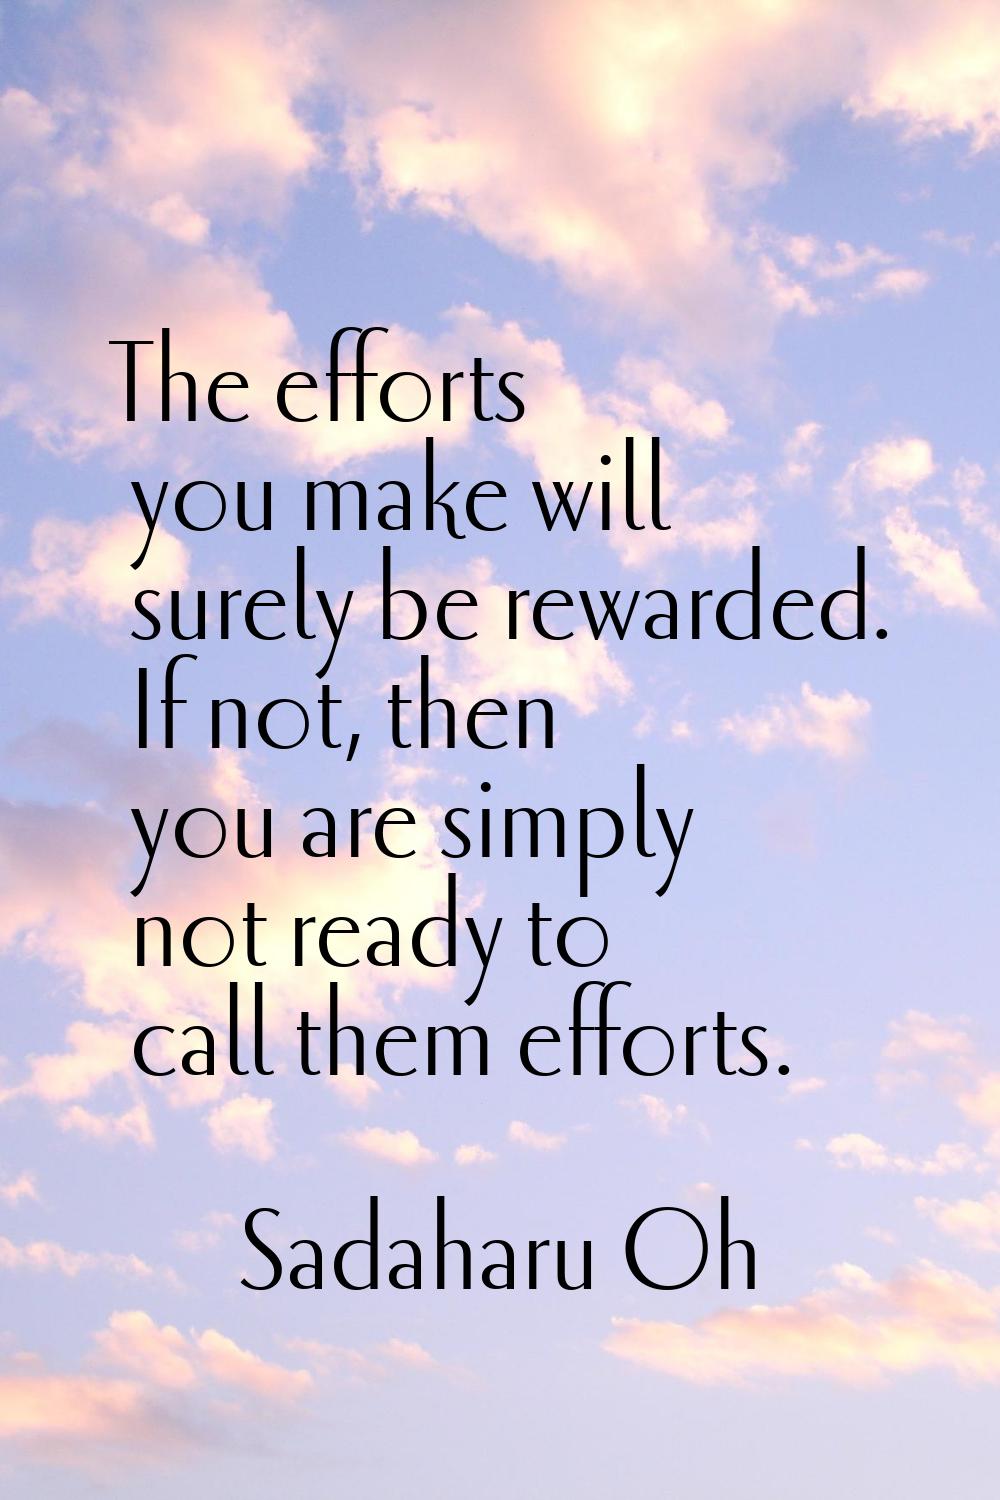 The efforts you make will surely be rewarded. If not, then you are simply not ready to call them ef